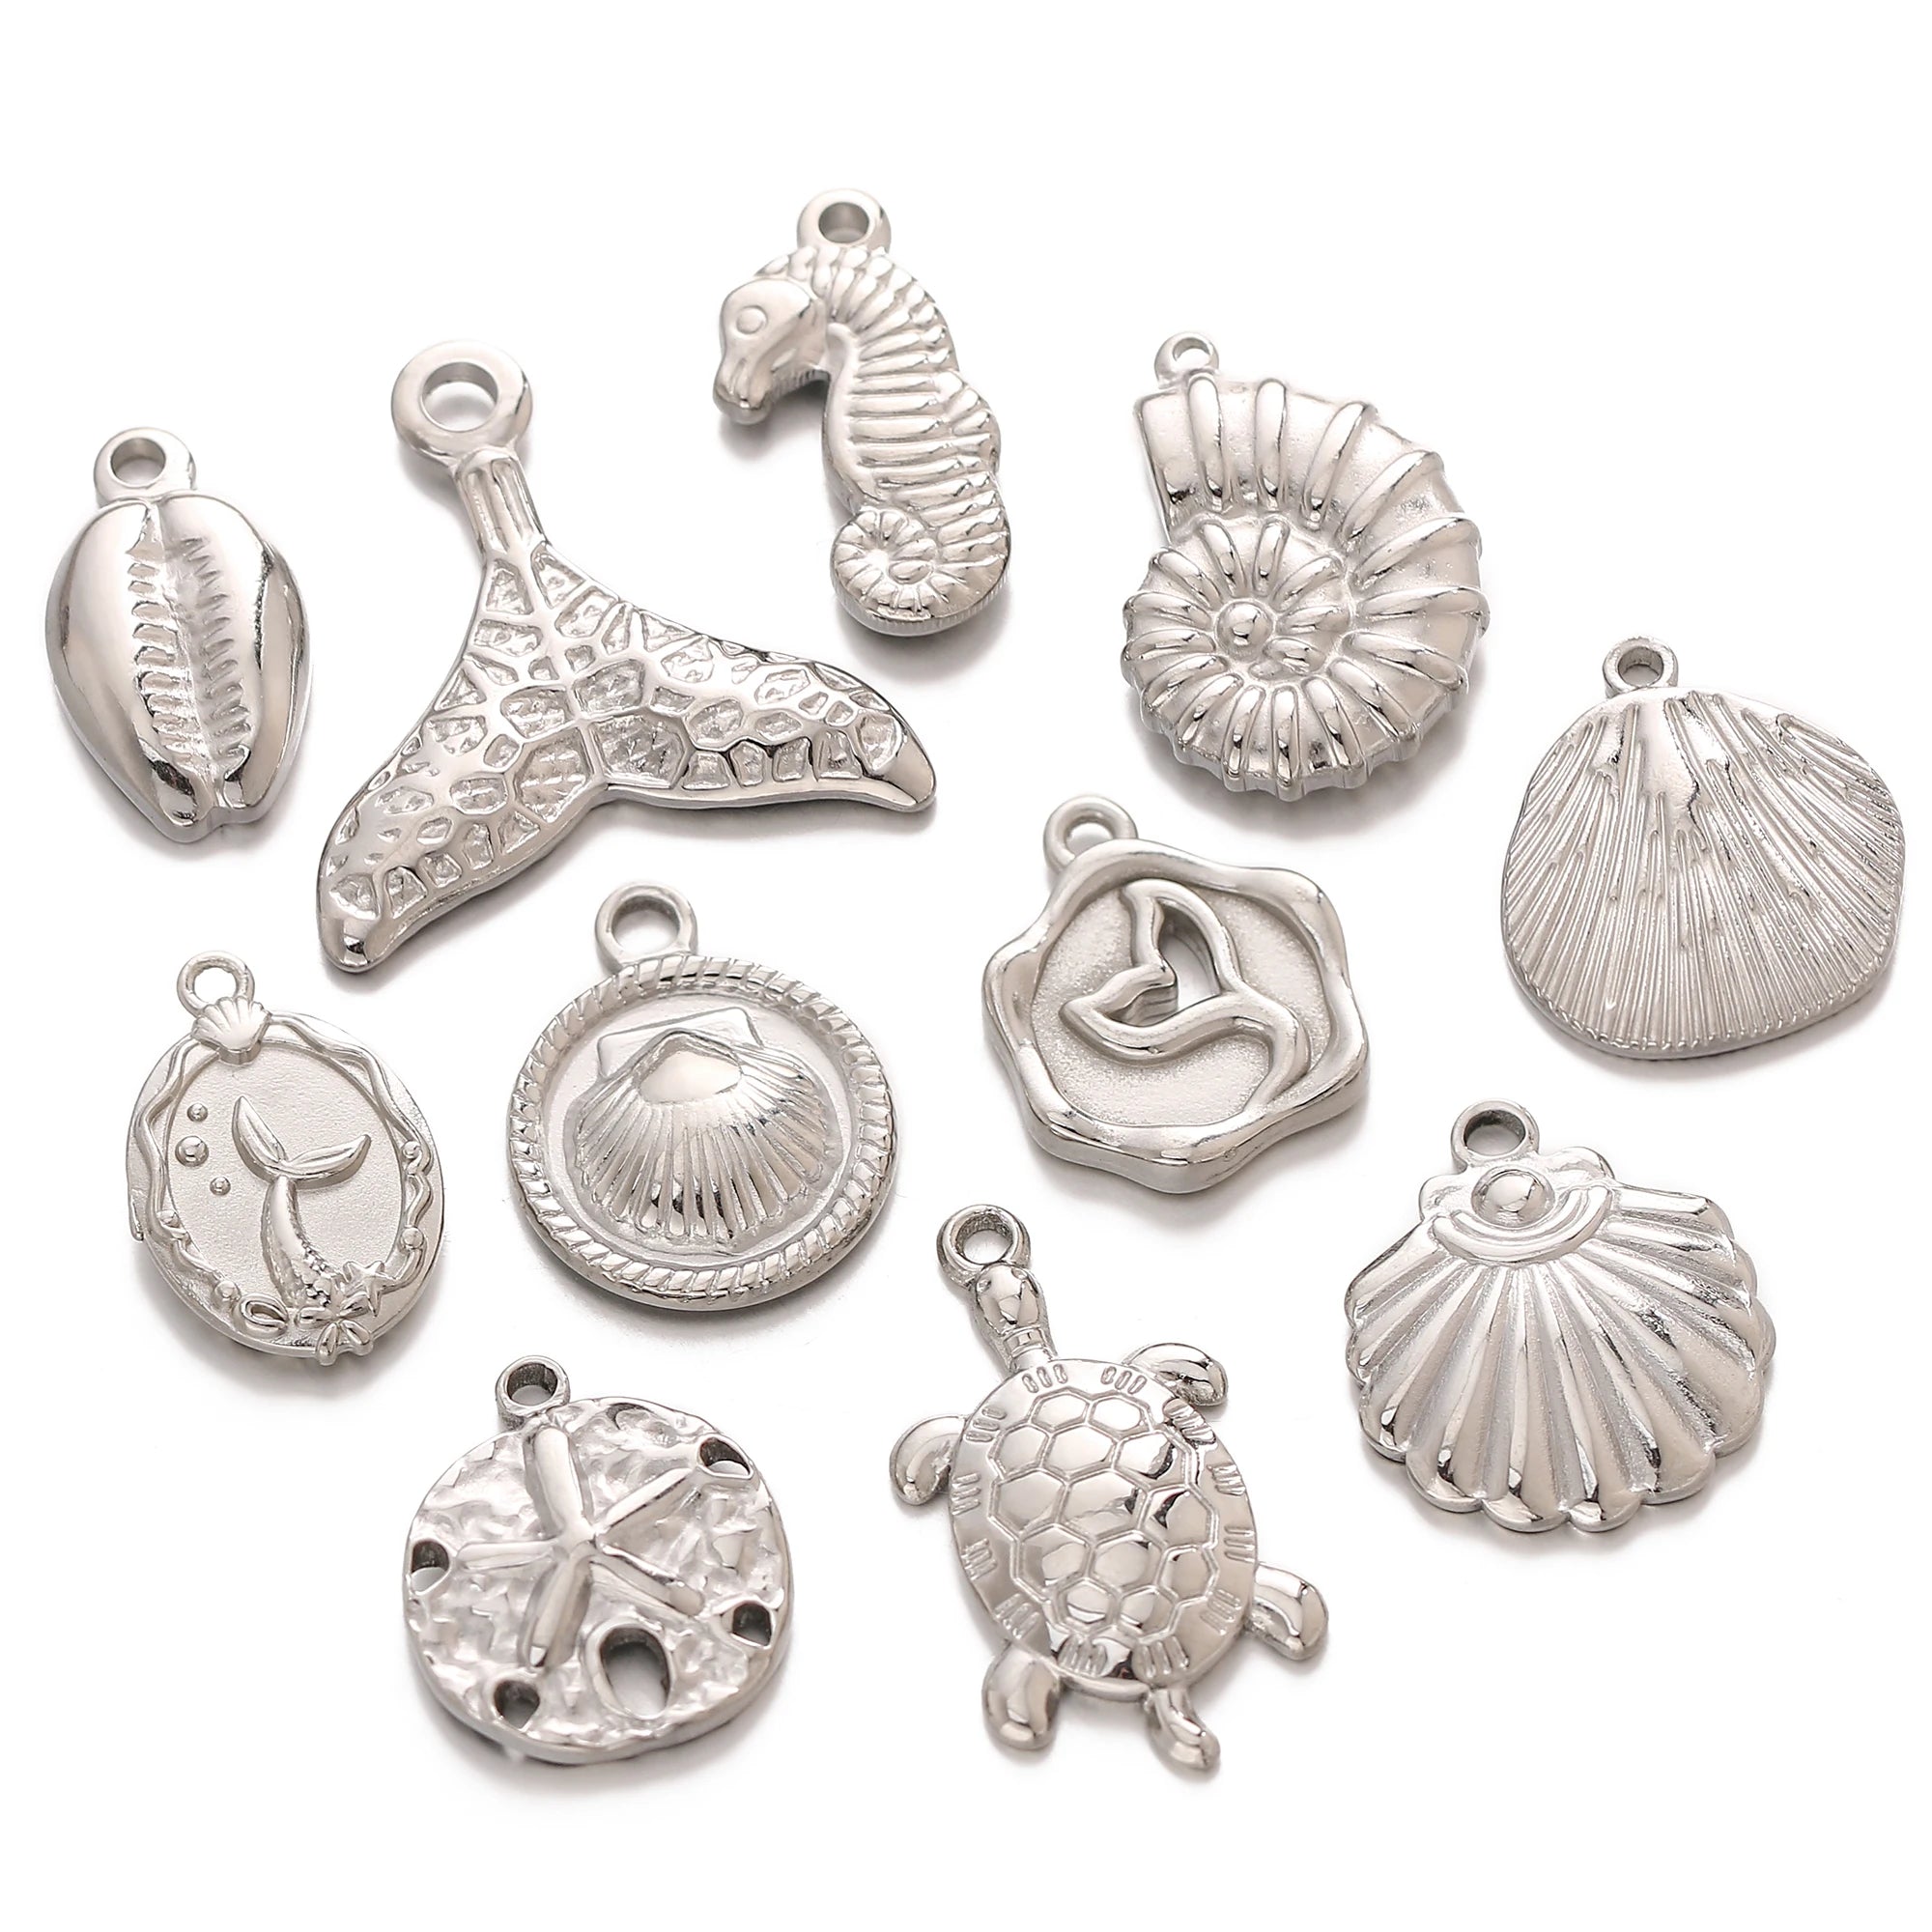 Ocean Life Shell / Turtle / Conch / Starfish / Fish Tail Pendants For DIY Earrings, Necklaces or Bracelets